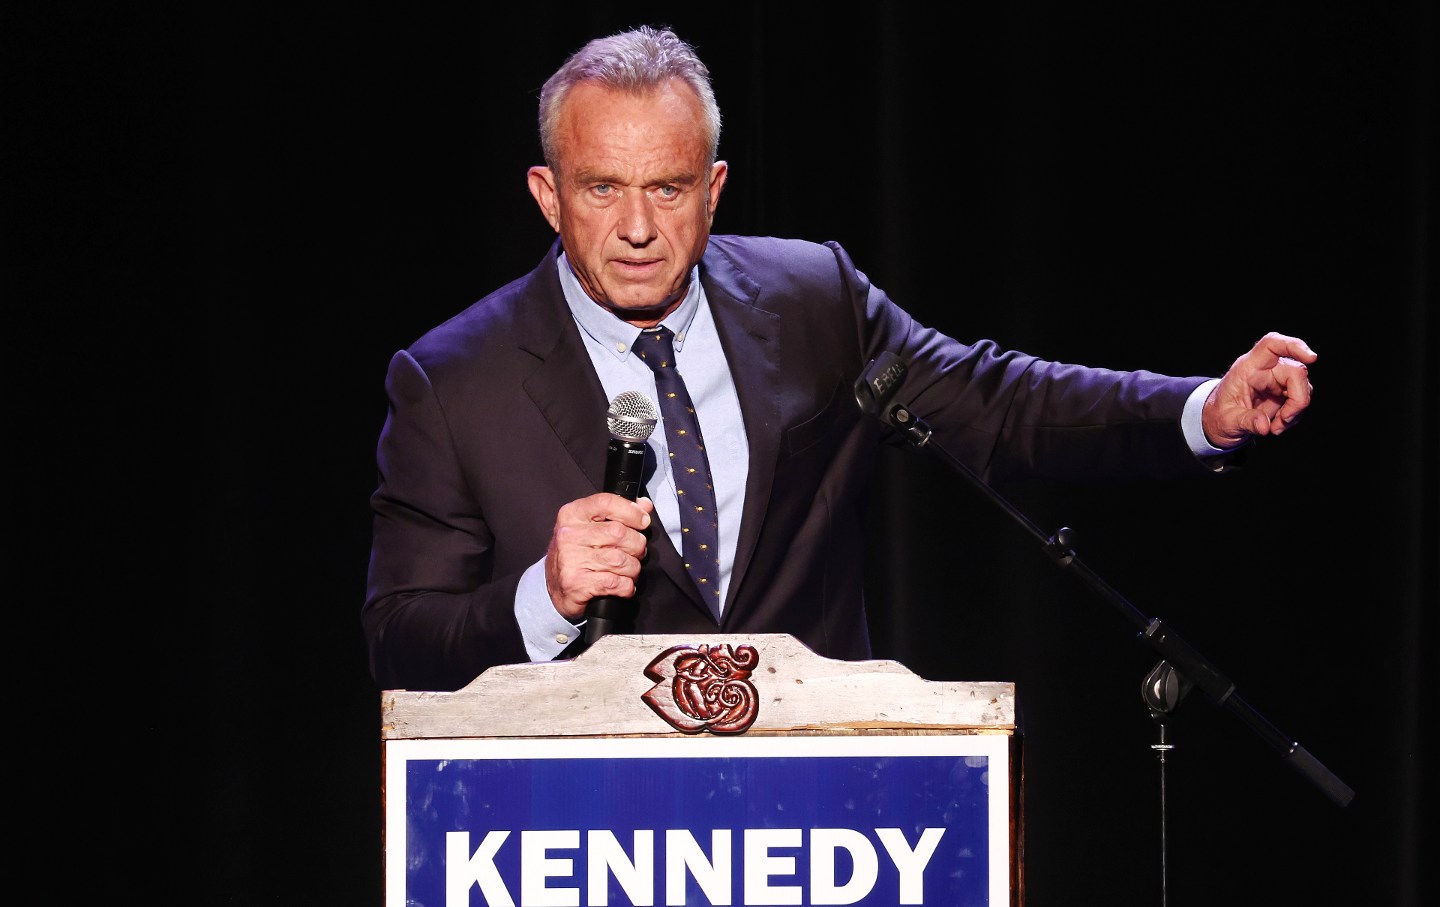 Democratic presidential candidate Robert F. Kennedy Jr. speaks at a Hispanic Heritage Month event at Wilshire Ebell Theatre on September 15, 2023 in Los Angeles, California.